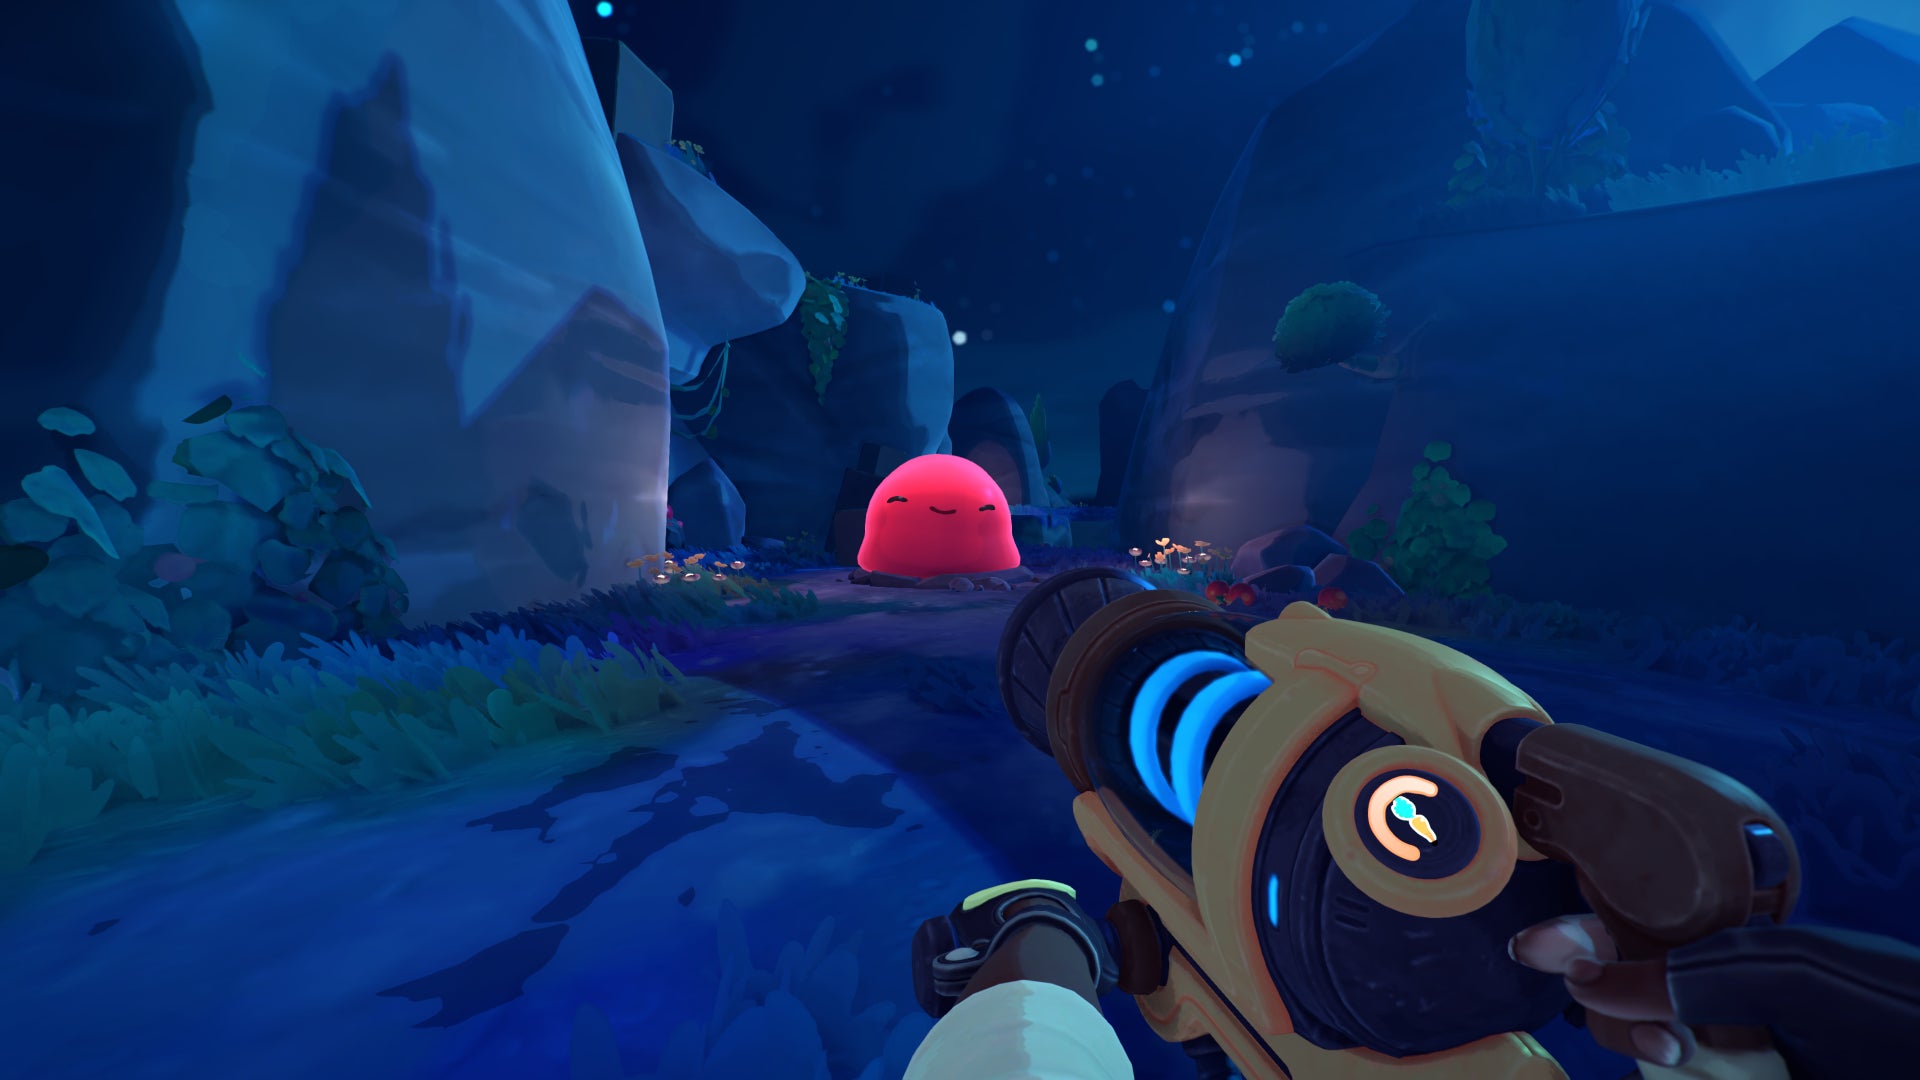 A Pink Gordo Slime can be seen in Slime Rancher 2